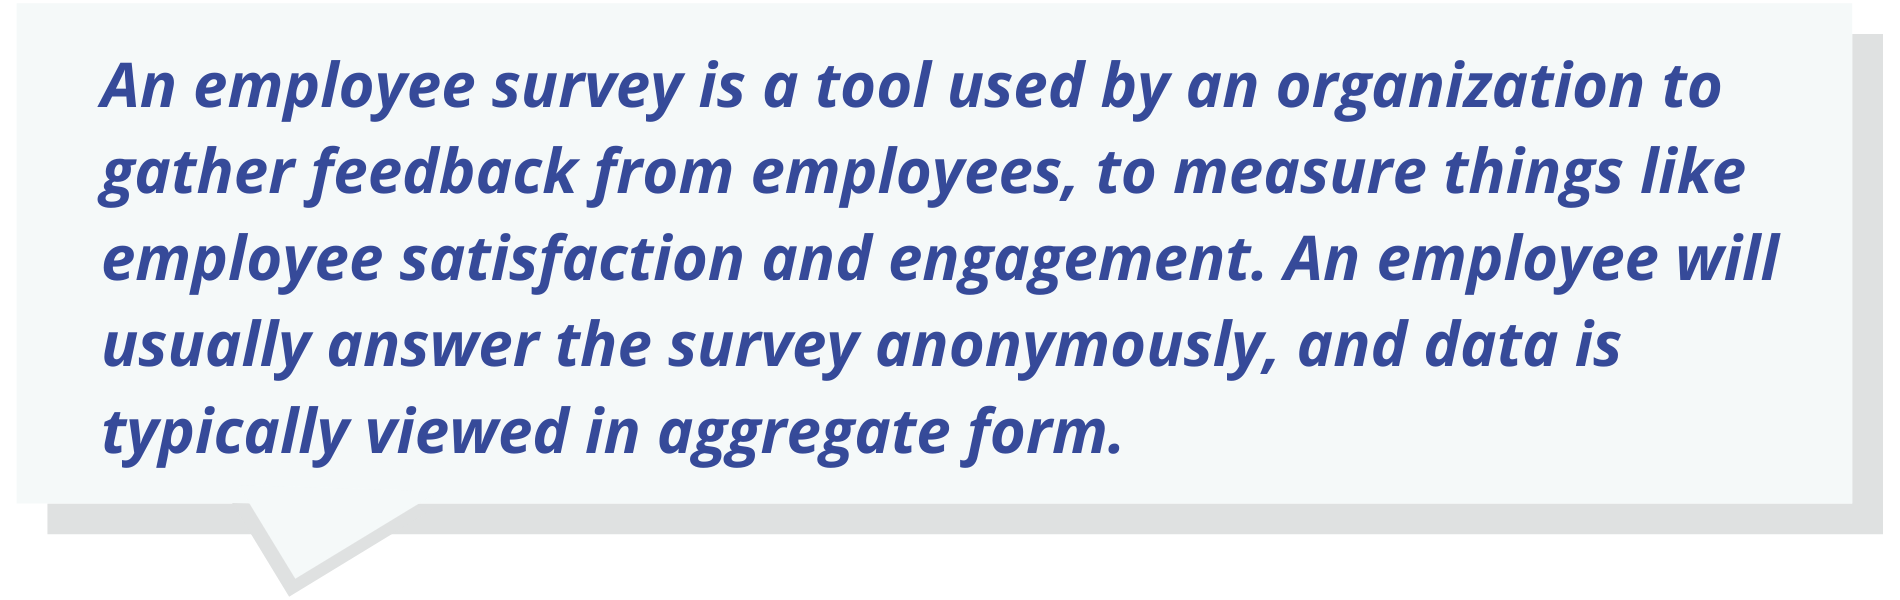 An employee survey is a tool used by an organization to gather feedback from employees, to measure things like employee satisfaction and engagement. An employee will usually answer the survey anonymously, and data is typically viewed in aggregate form.